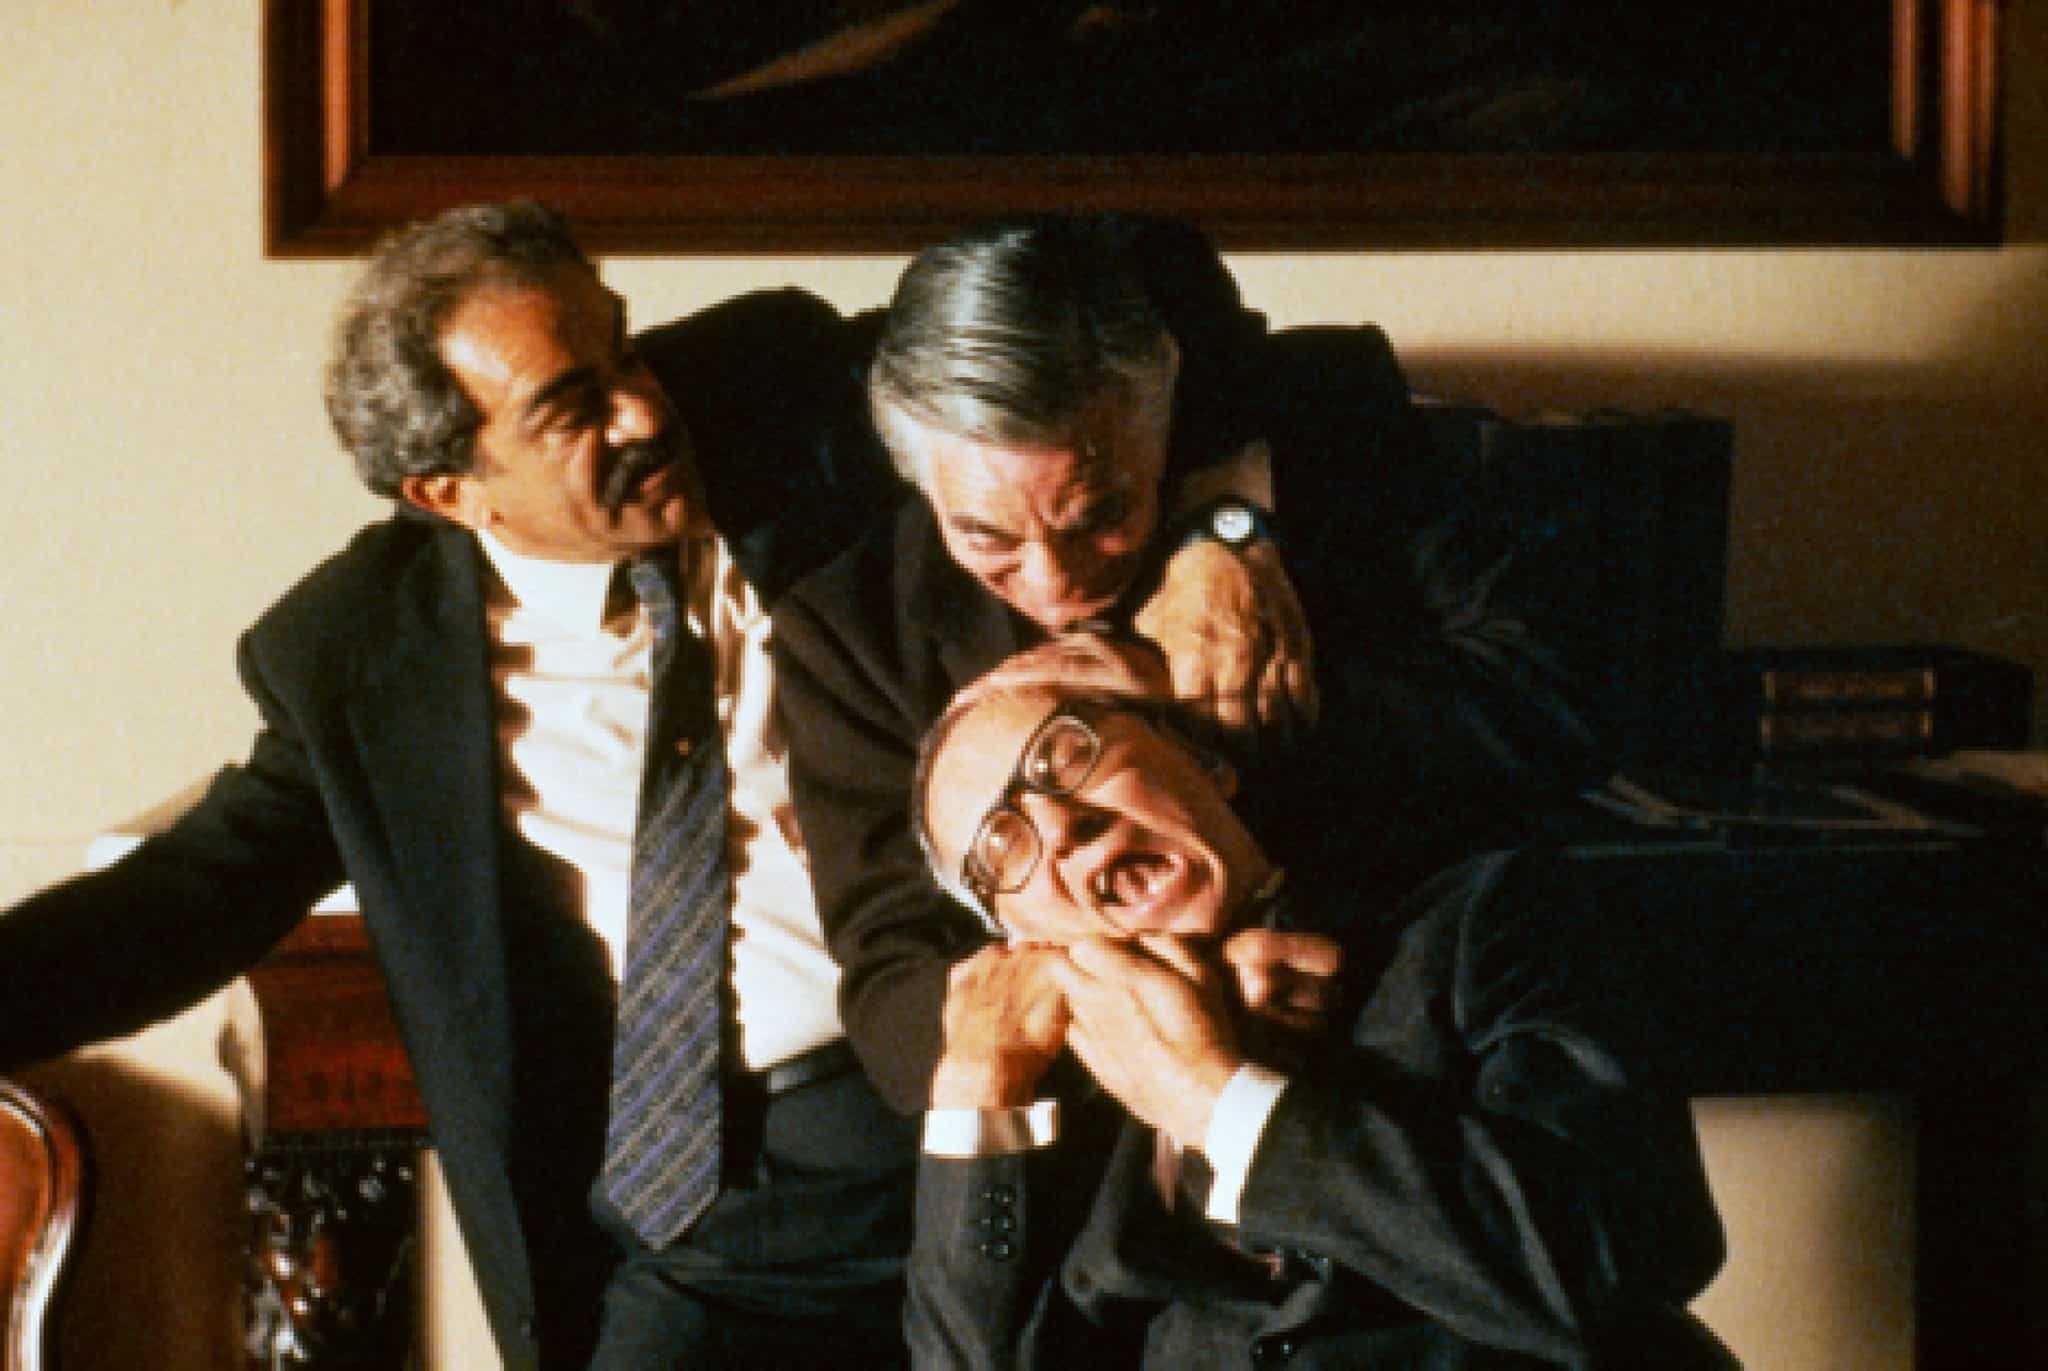 Sal Borgese, Franco Citti, and Enzo Robutti in The Godfather Part III (1990)